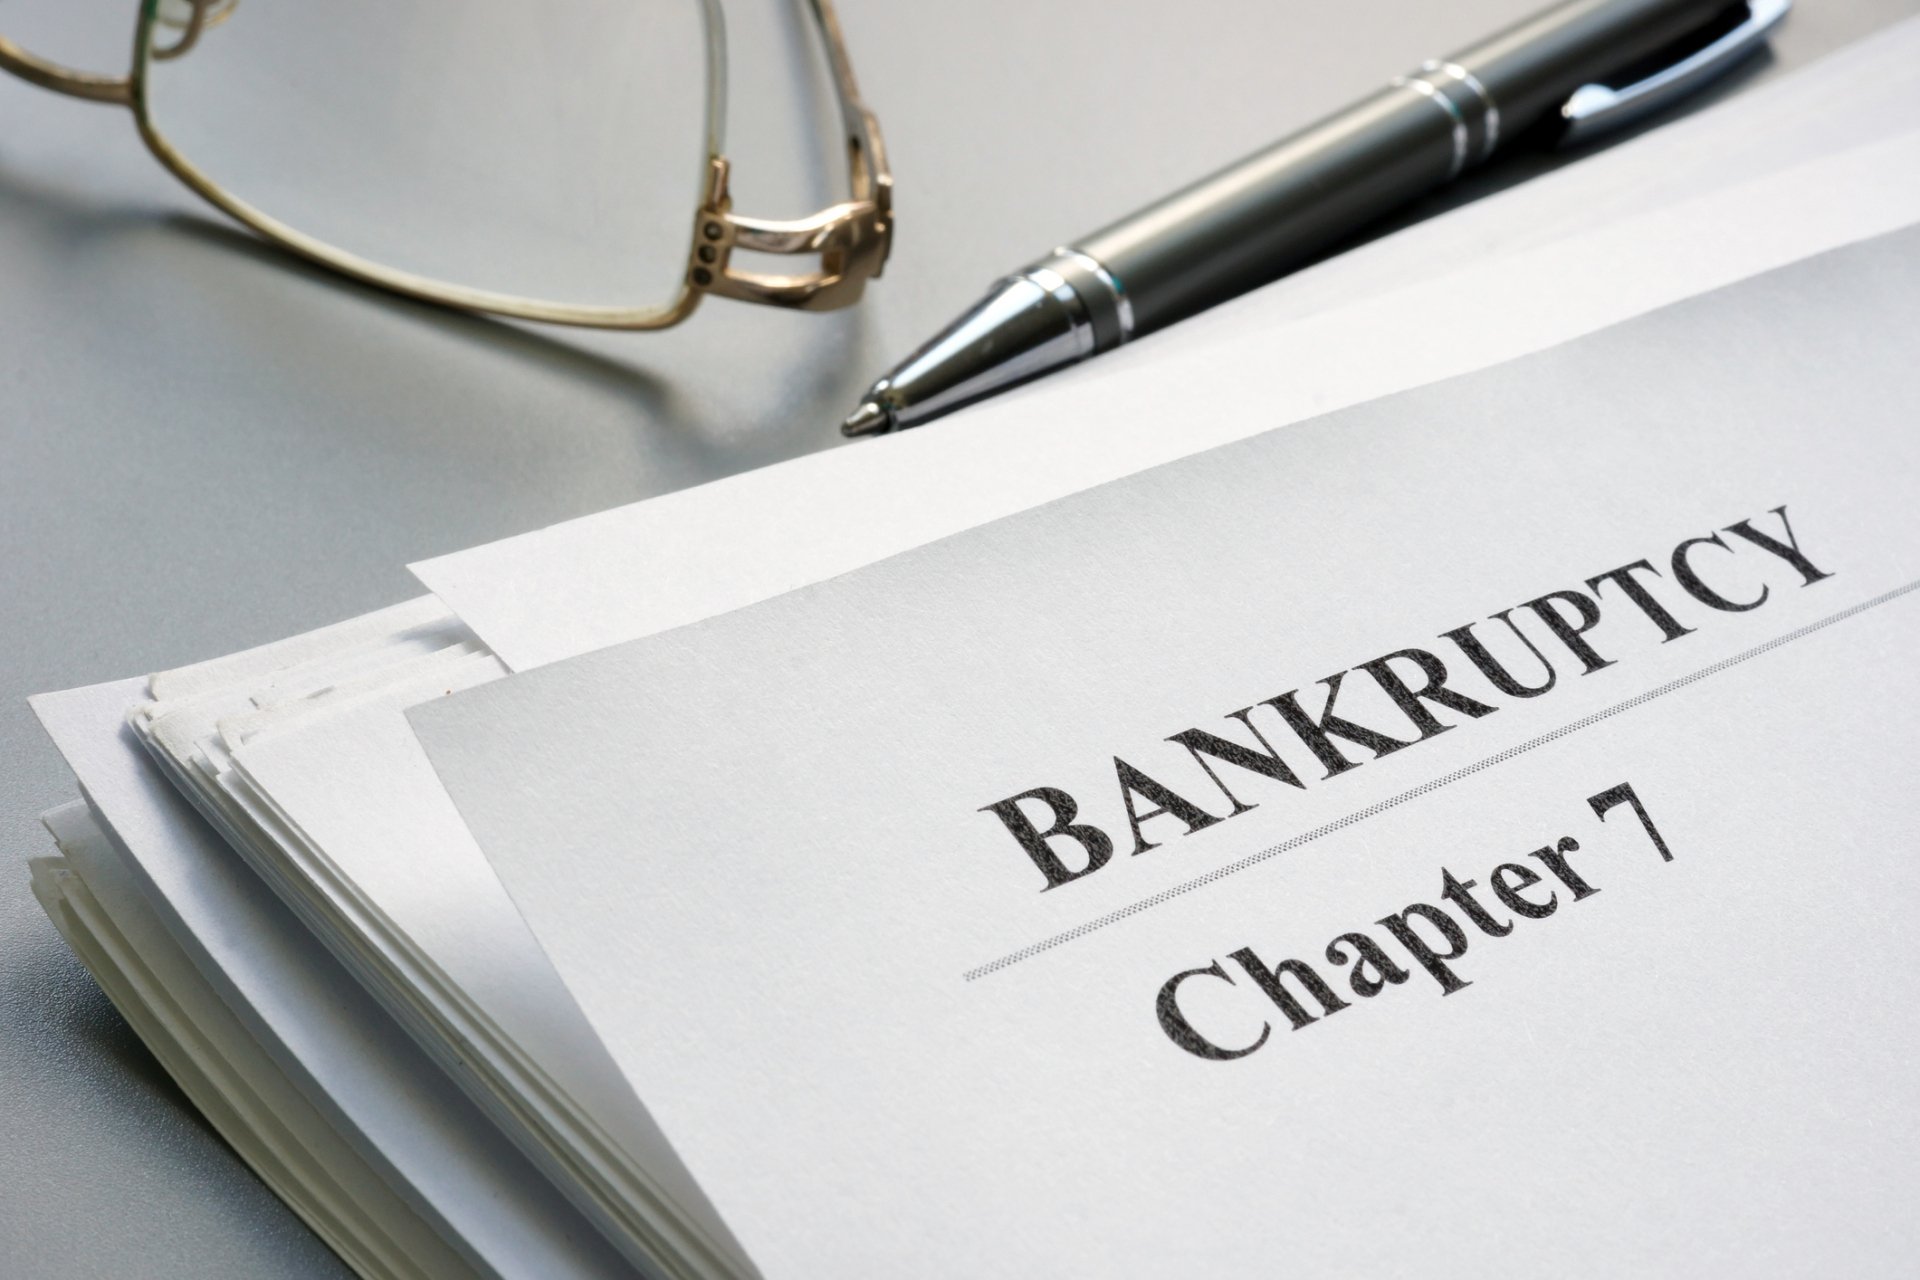 What Do the Chapters in Bankruptcy Mean? A Guide